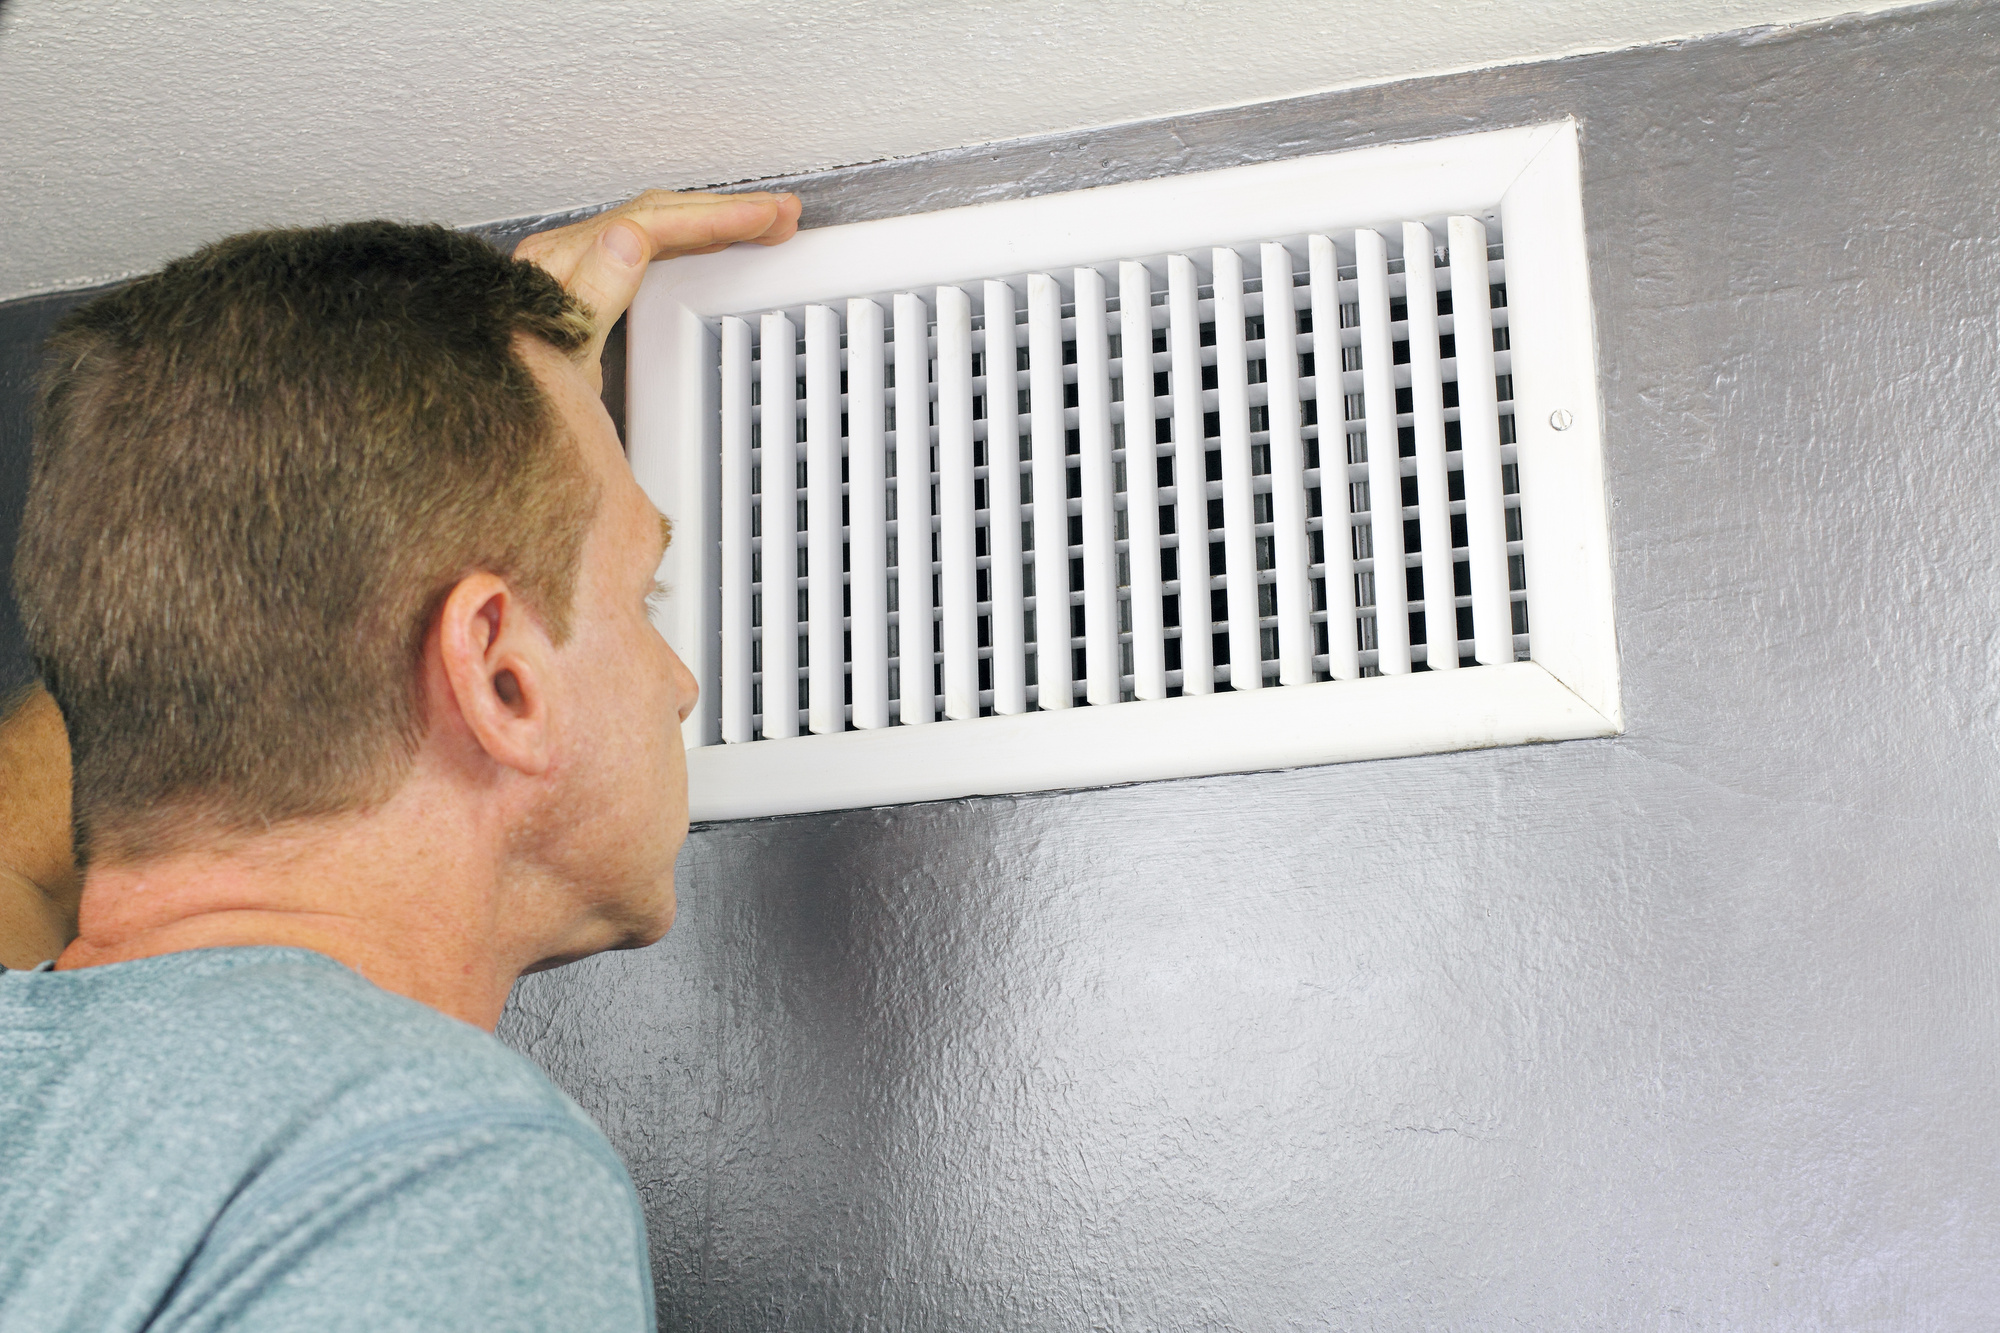 5 Air Conditioning Tips to Cut Costs and Beat the Heat